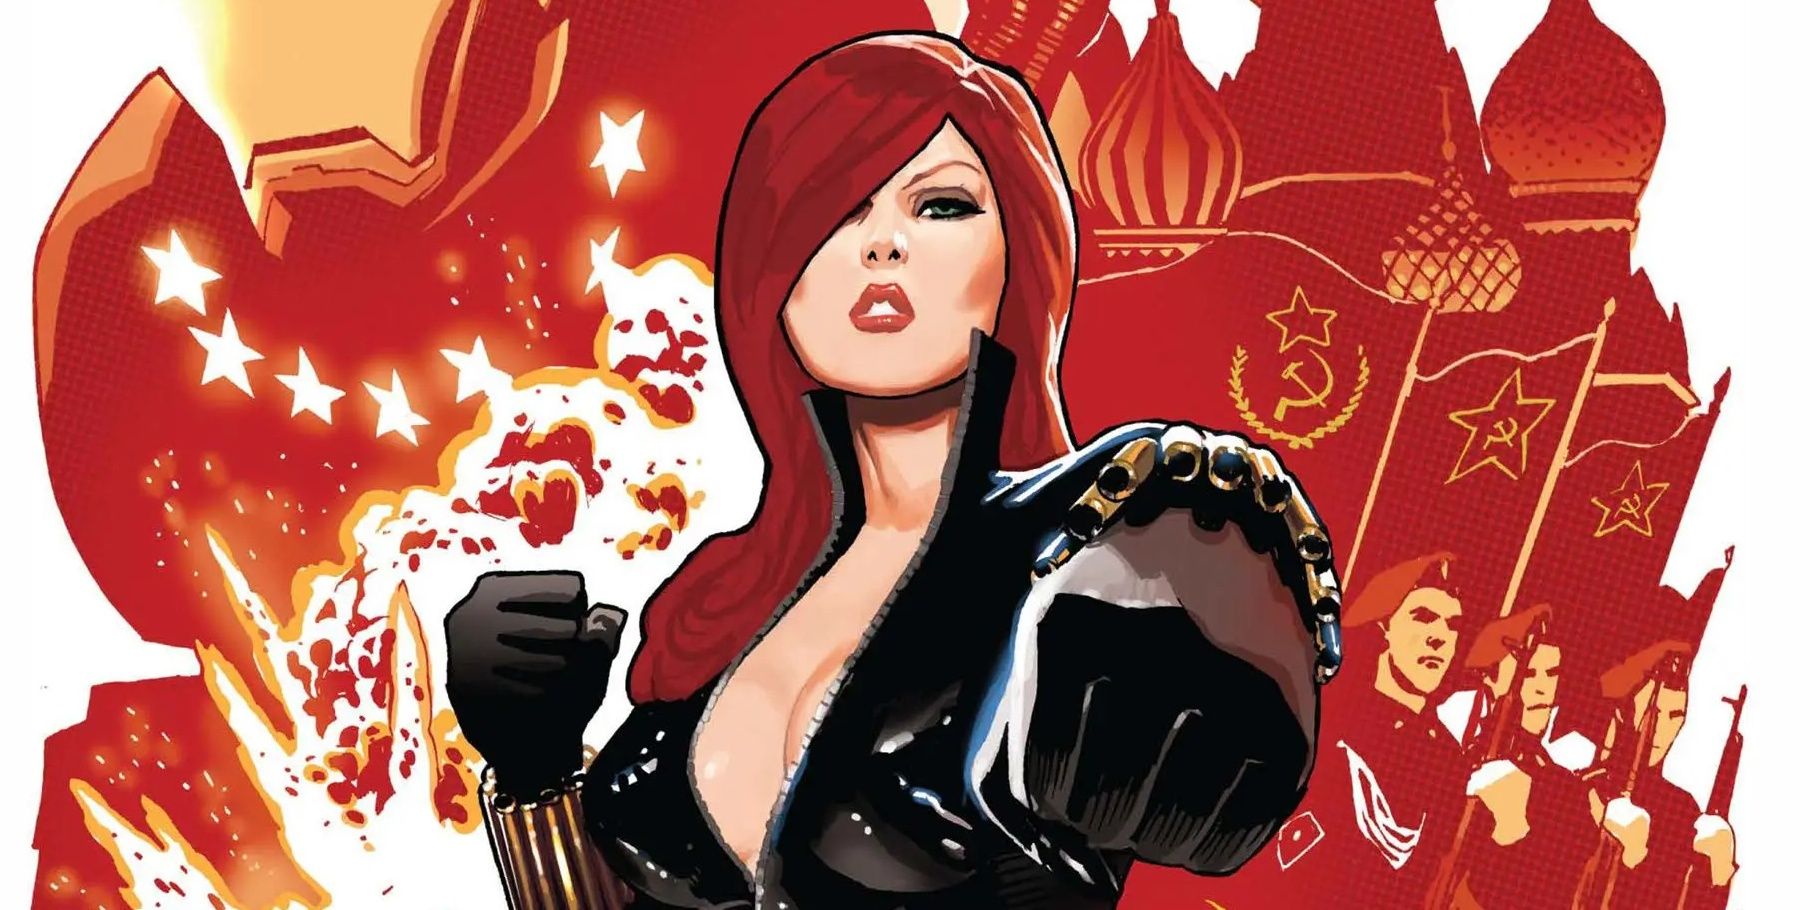 Natasha Romanoff as the Black Widow on the cover of Black Widow Vol 4 aiming with her hands